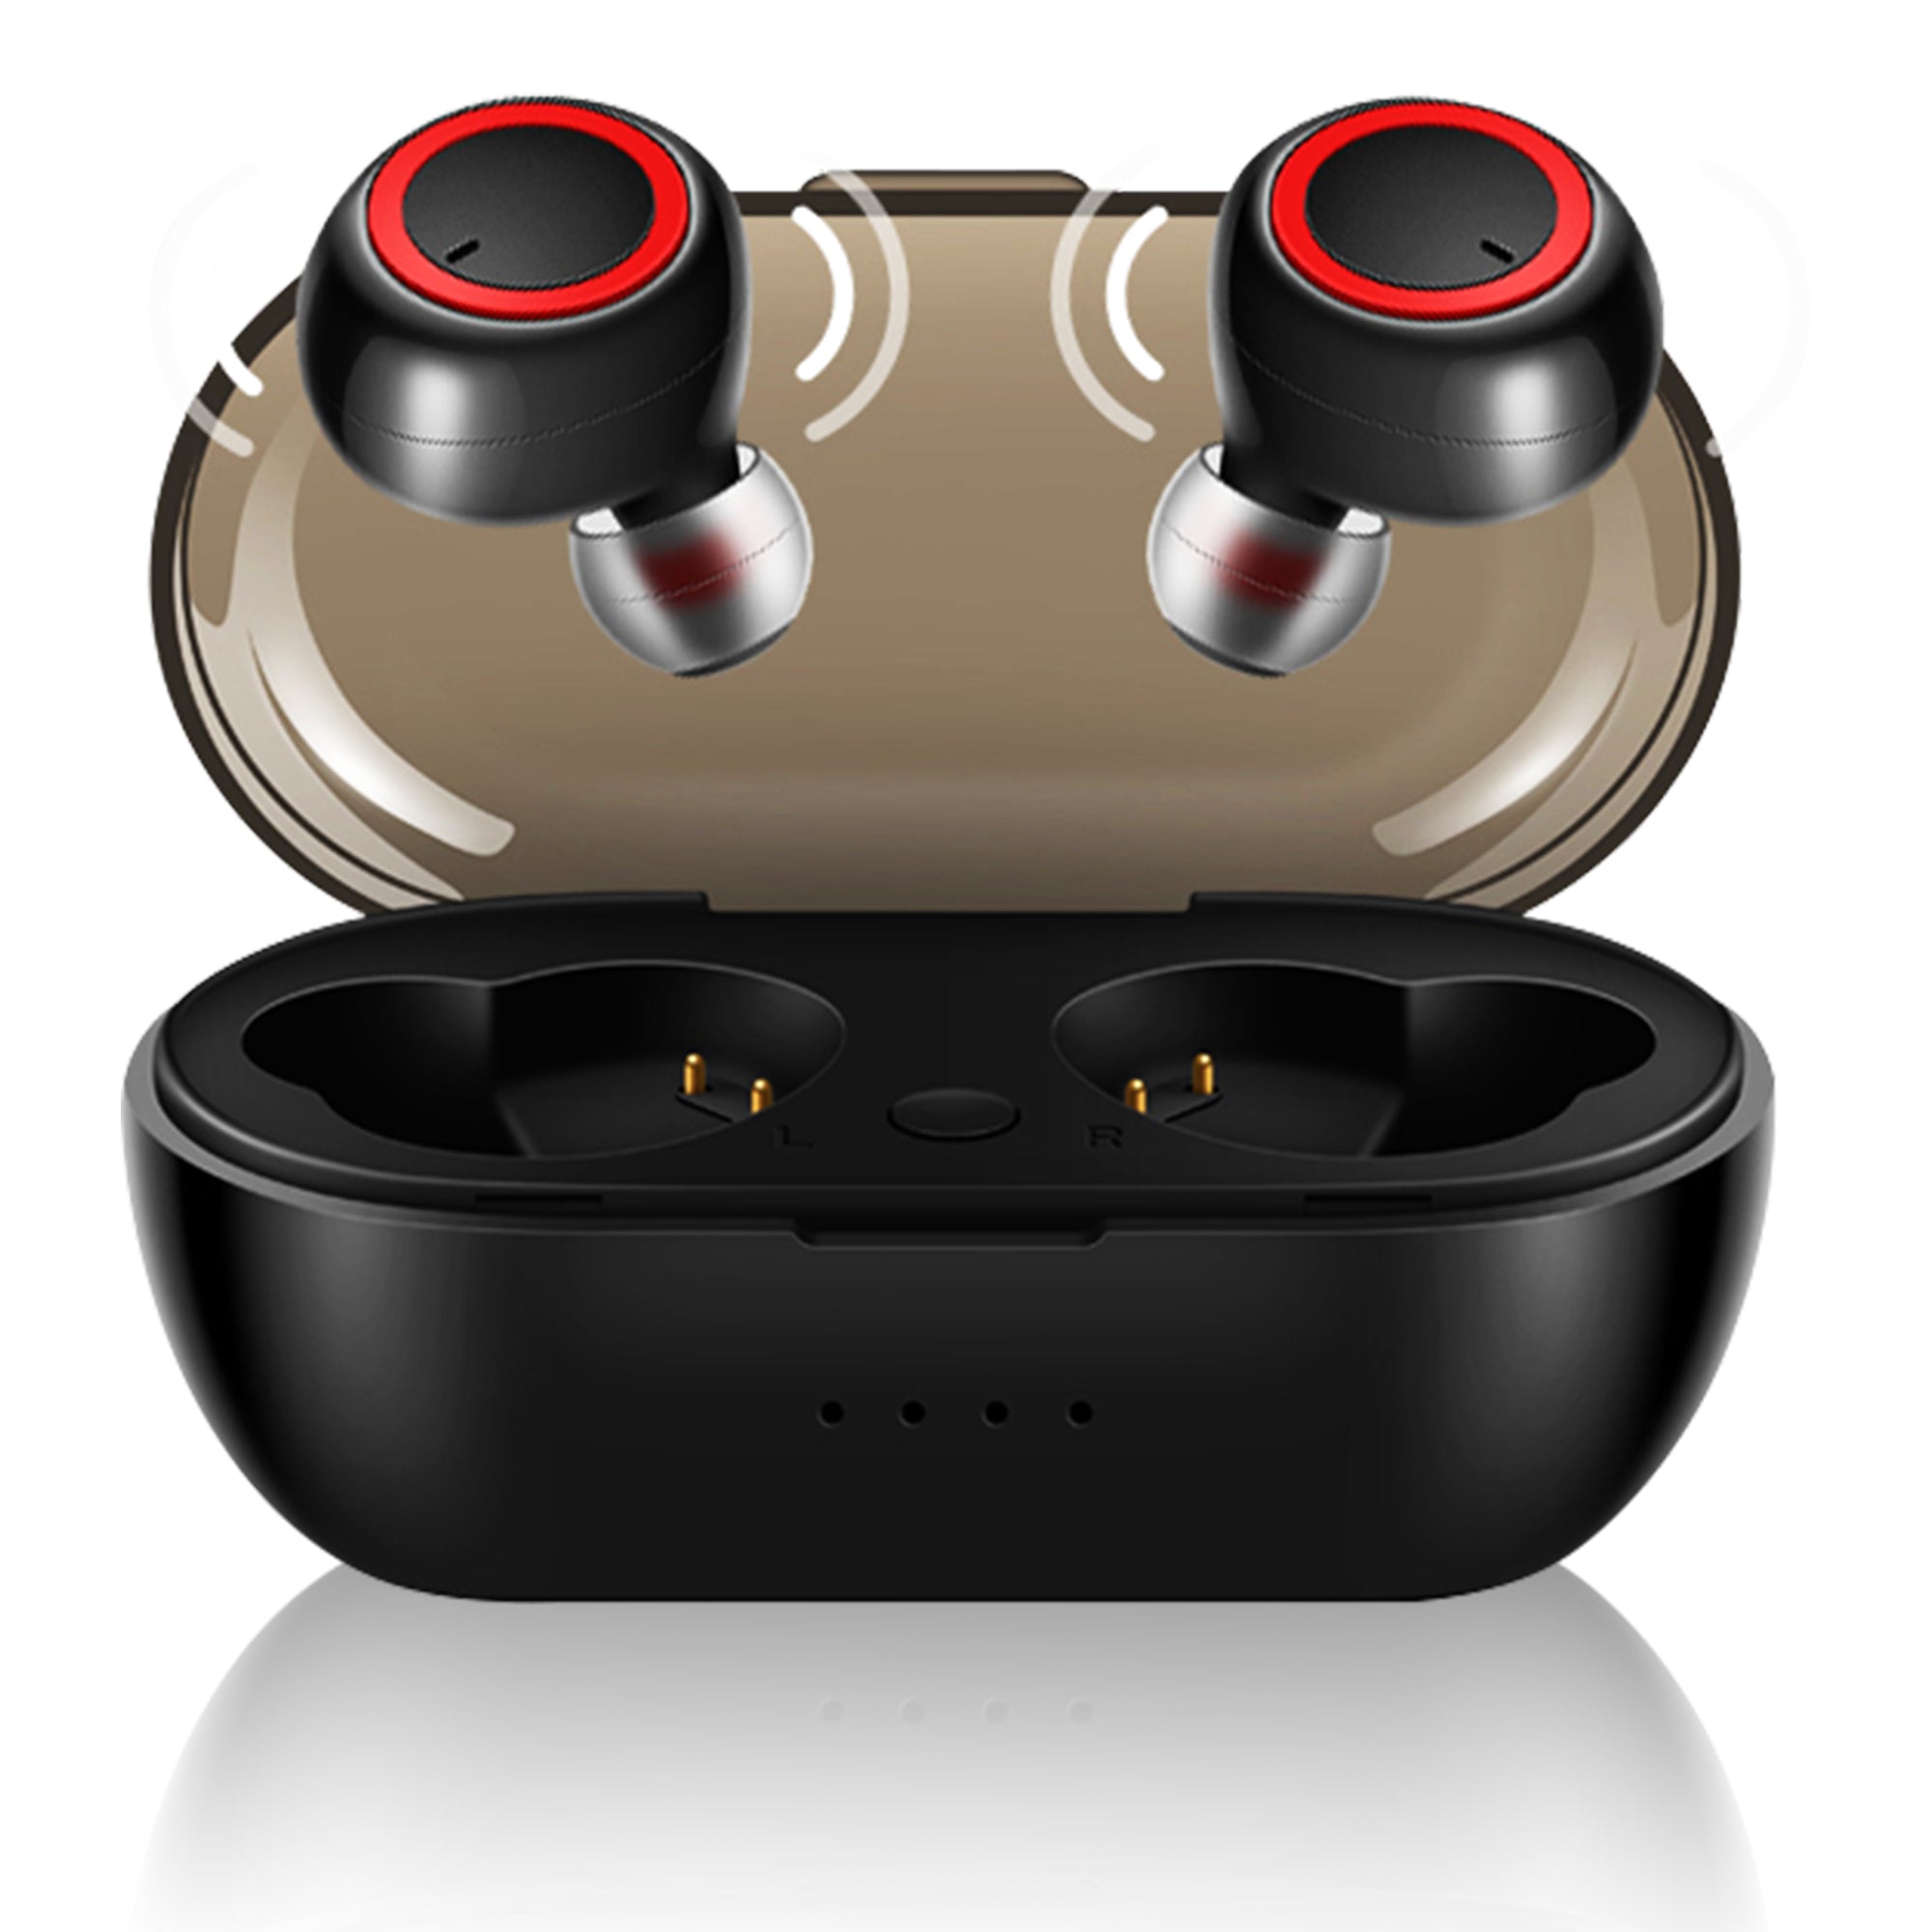 5 Core Wireless Earbuds Noise Canceling Headphones Wireless Bluetooth 5.0 Powerful Beats and Clean Audio TWS Earbuds w Extra Long Playback - EP01